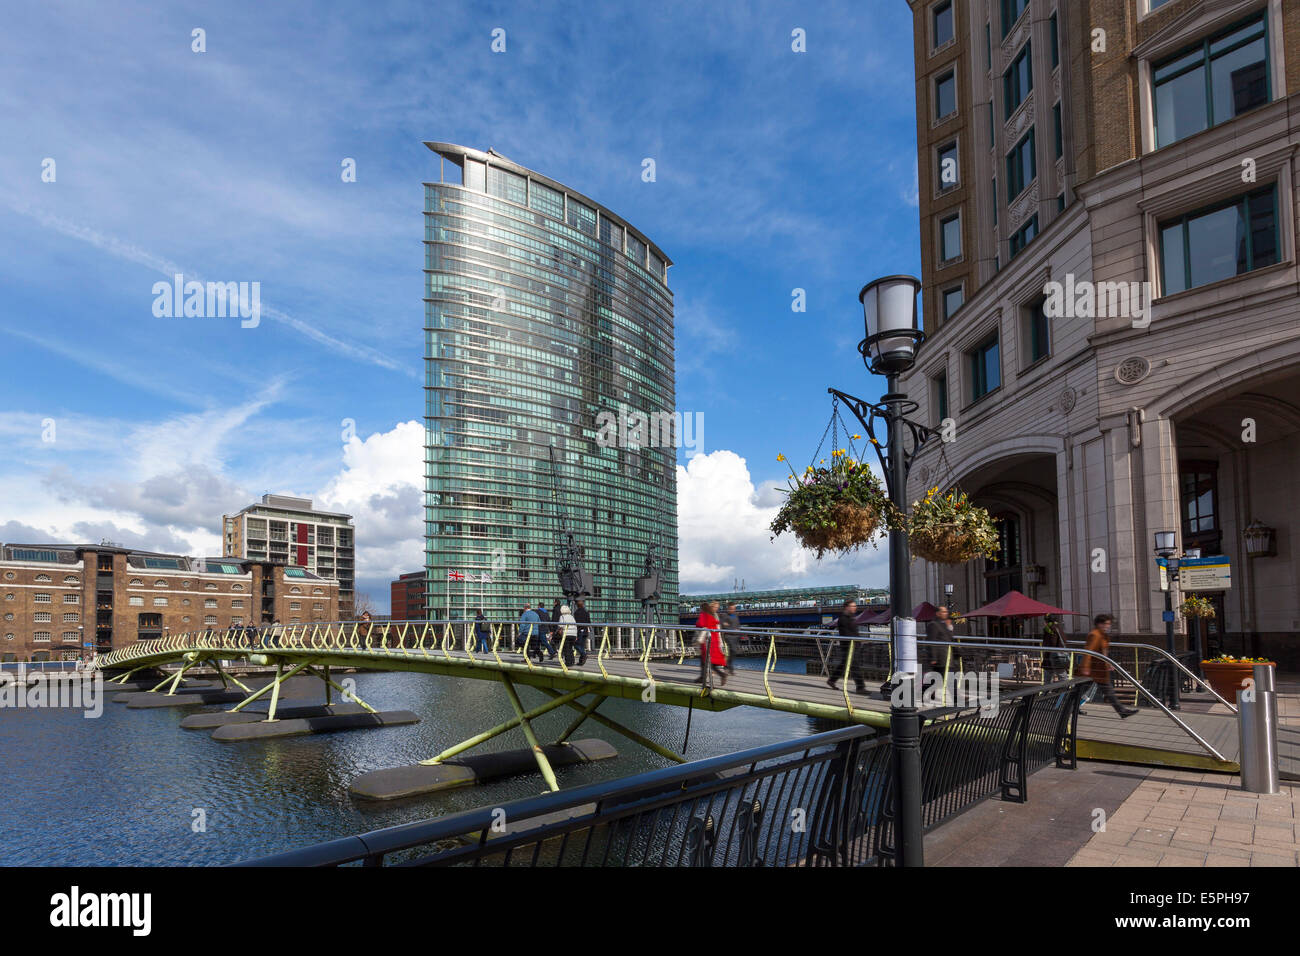 A bridge crossing the North Quay with the London Marriott Hotel behind, Canary Wharf, Docklands, London, England, United Kingdom Stock Photo